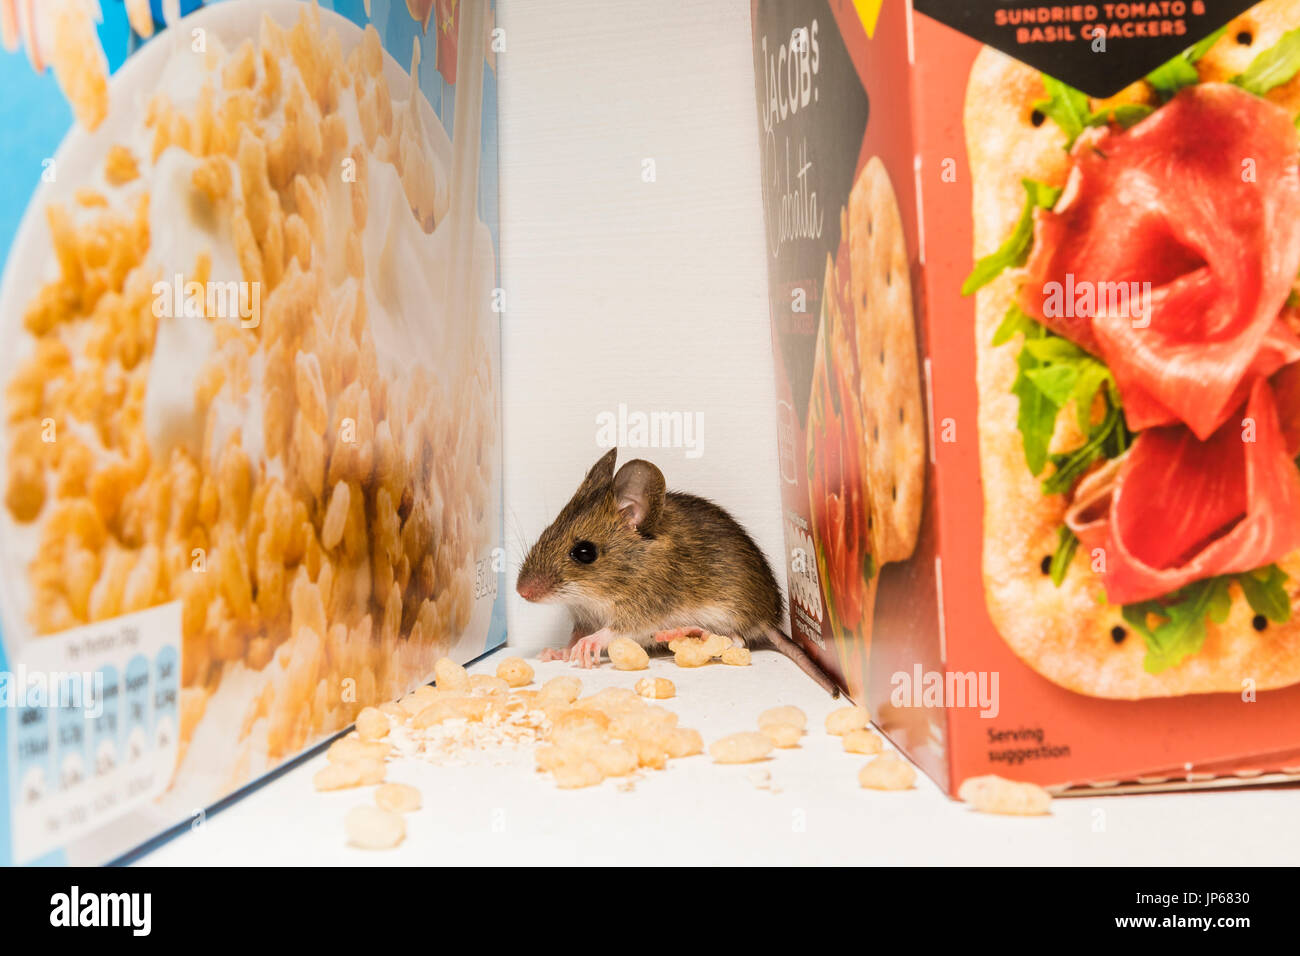 A mouse foraging in a kitchen cupboard (studio shot) Stock Photo